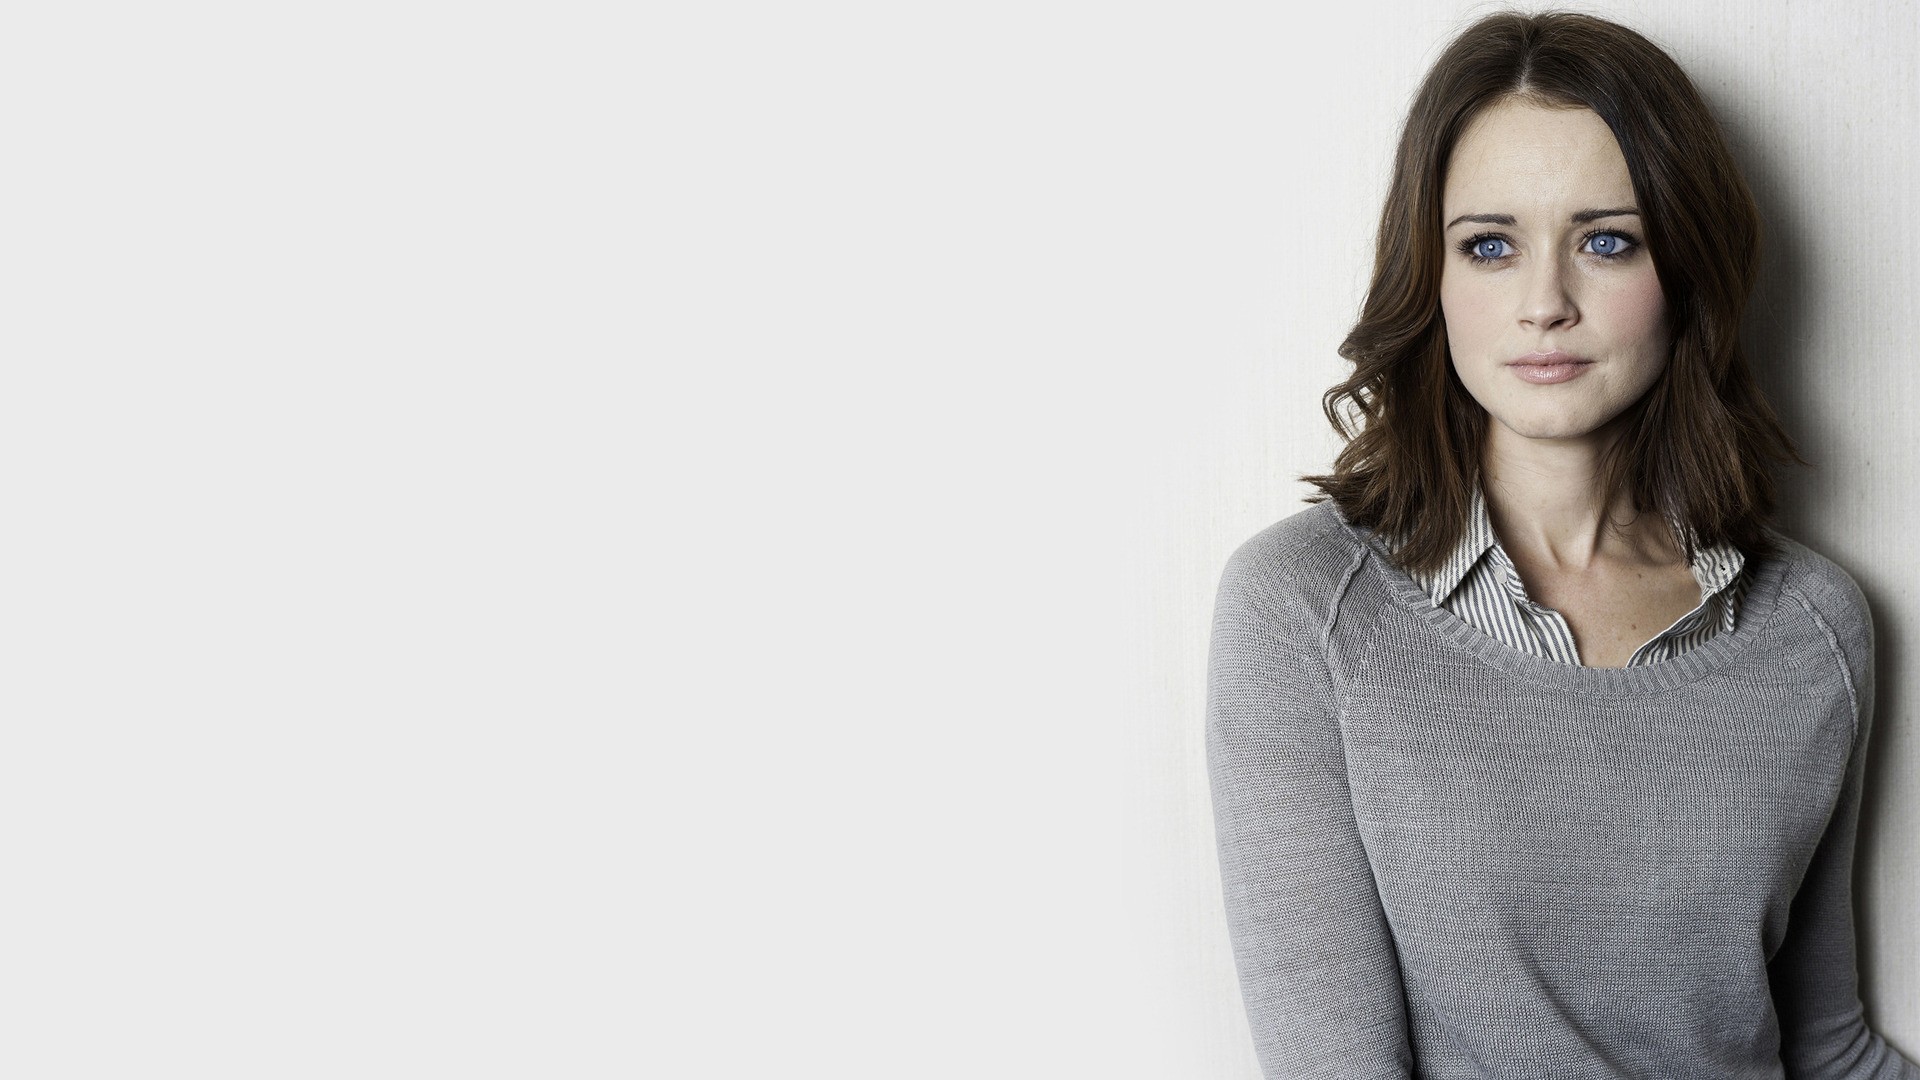 People 1920x1080 sweater blouses brunette blue eyes freckles Alexis Bledel portrait actress simple background women grey sweater studio indoors white background women indoors celebrity